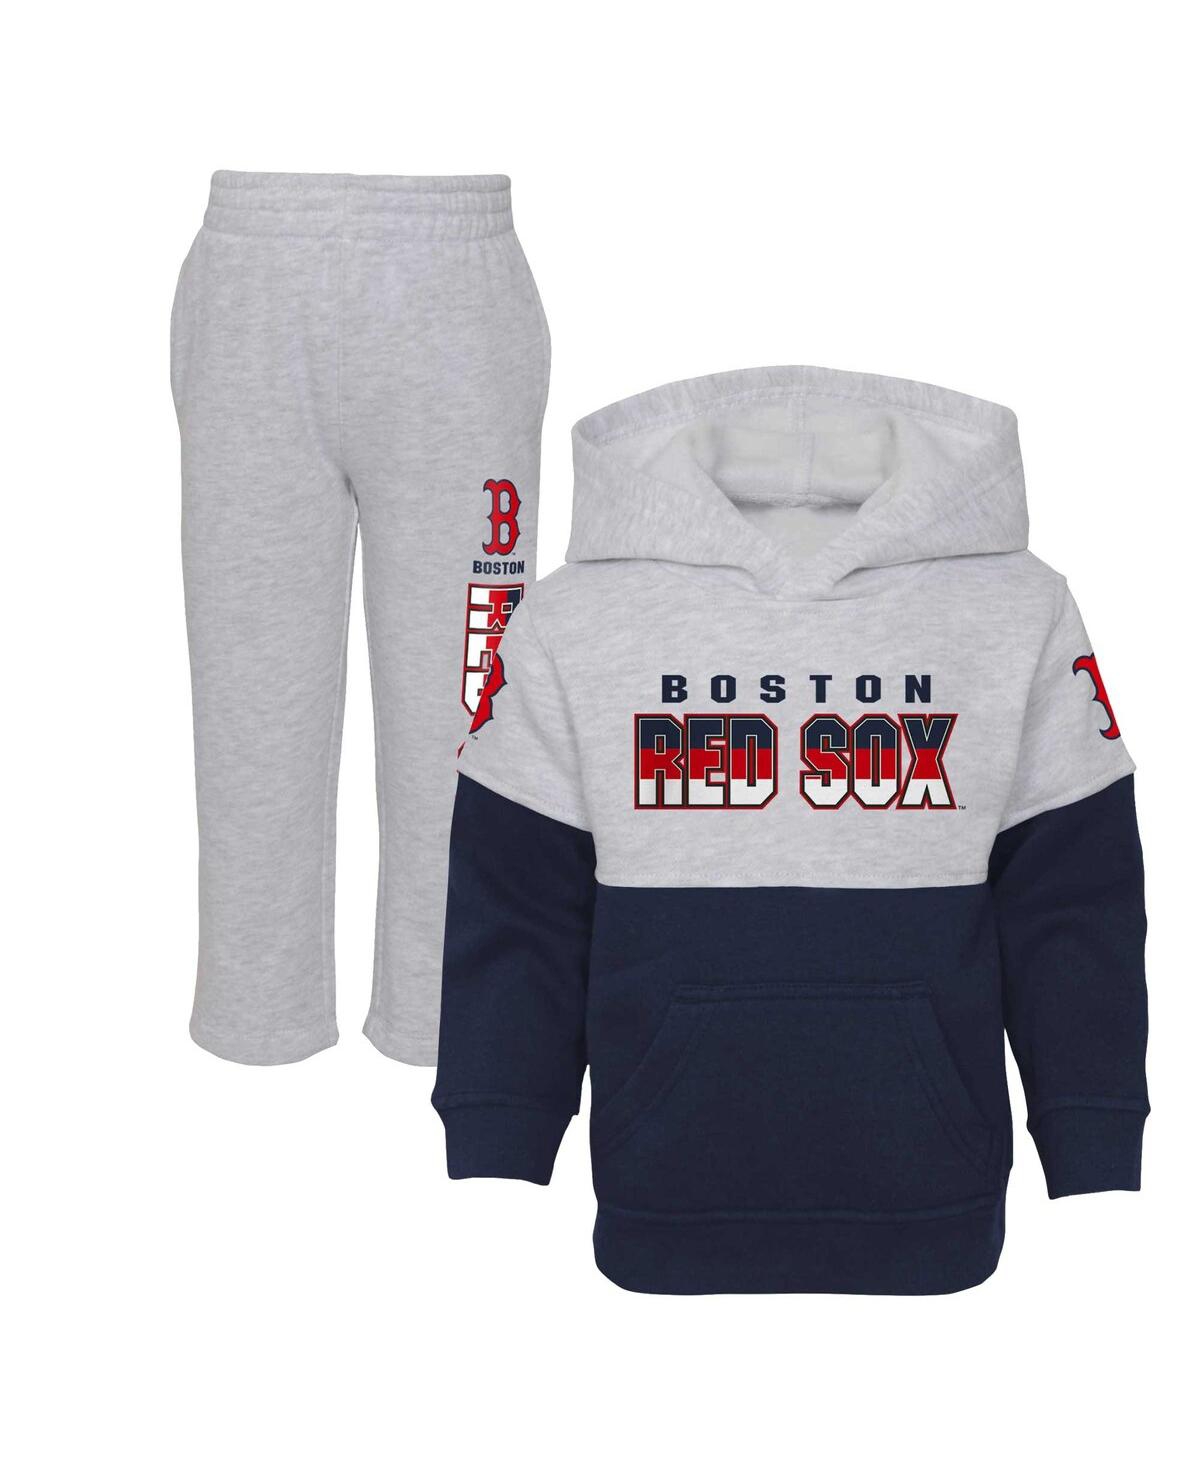 Outerstuff Babies' Toddler Boys And Girls Navy, Heather Gray Boston Red Sox Two-piece Playmaker Set In Navy,heather Gray